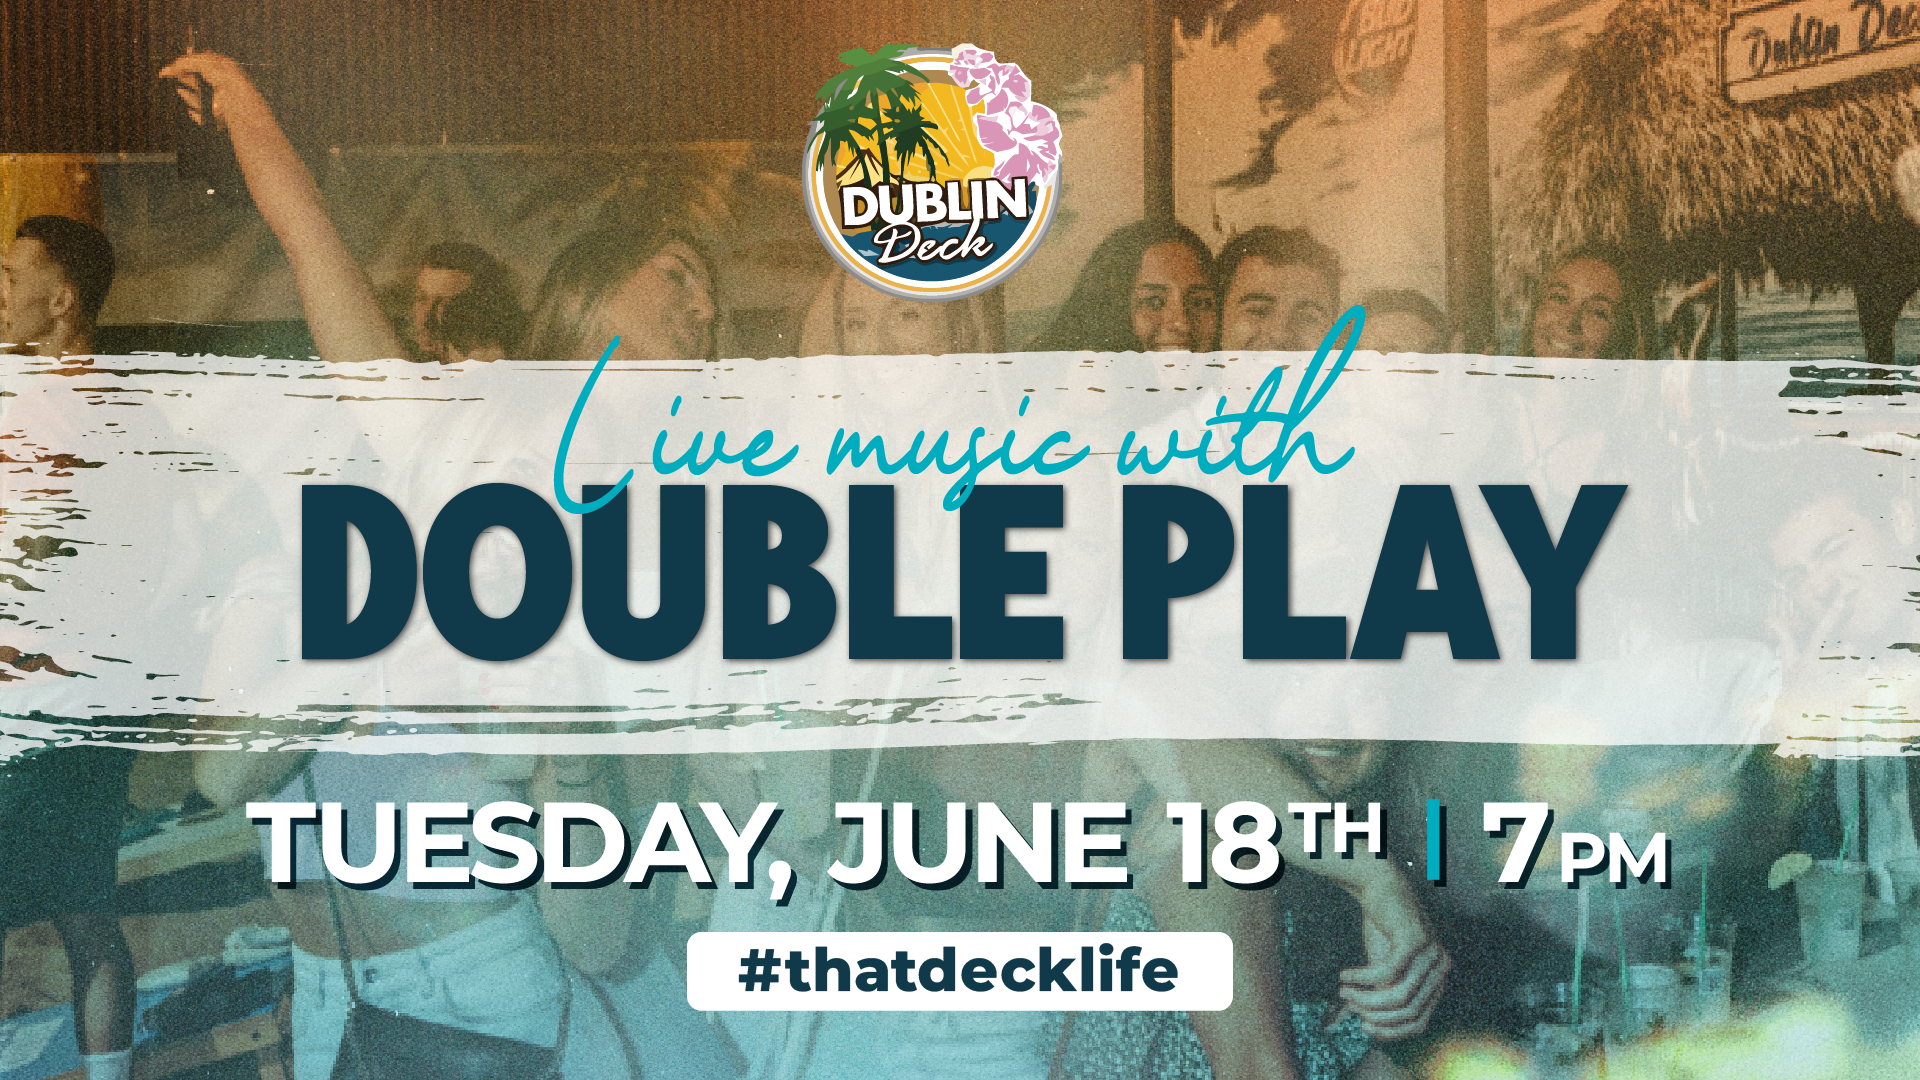 flyer for live music by double play on june 18th at 7pm